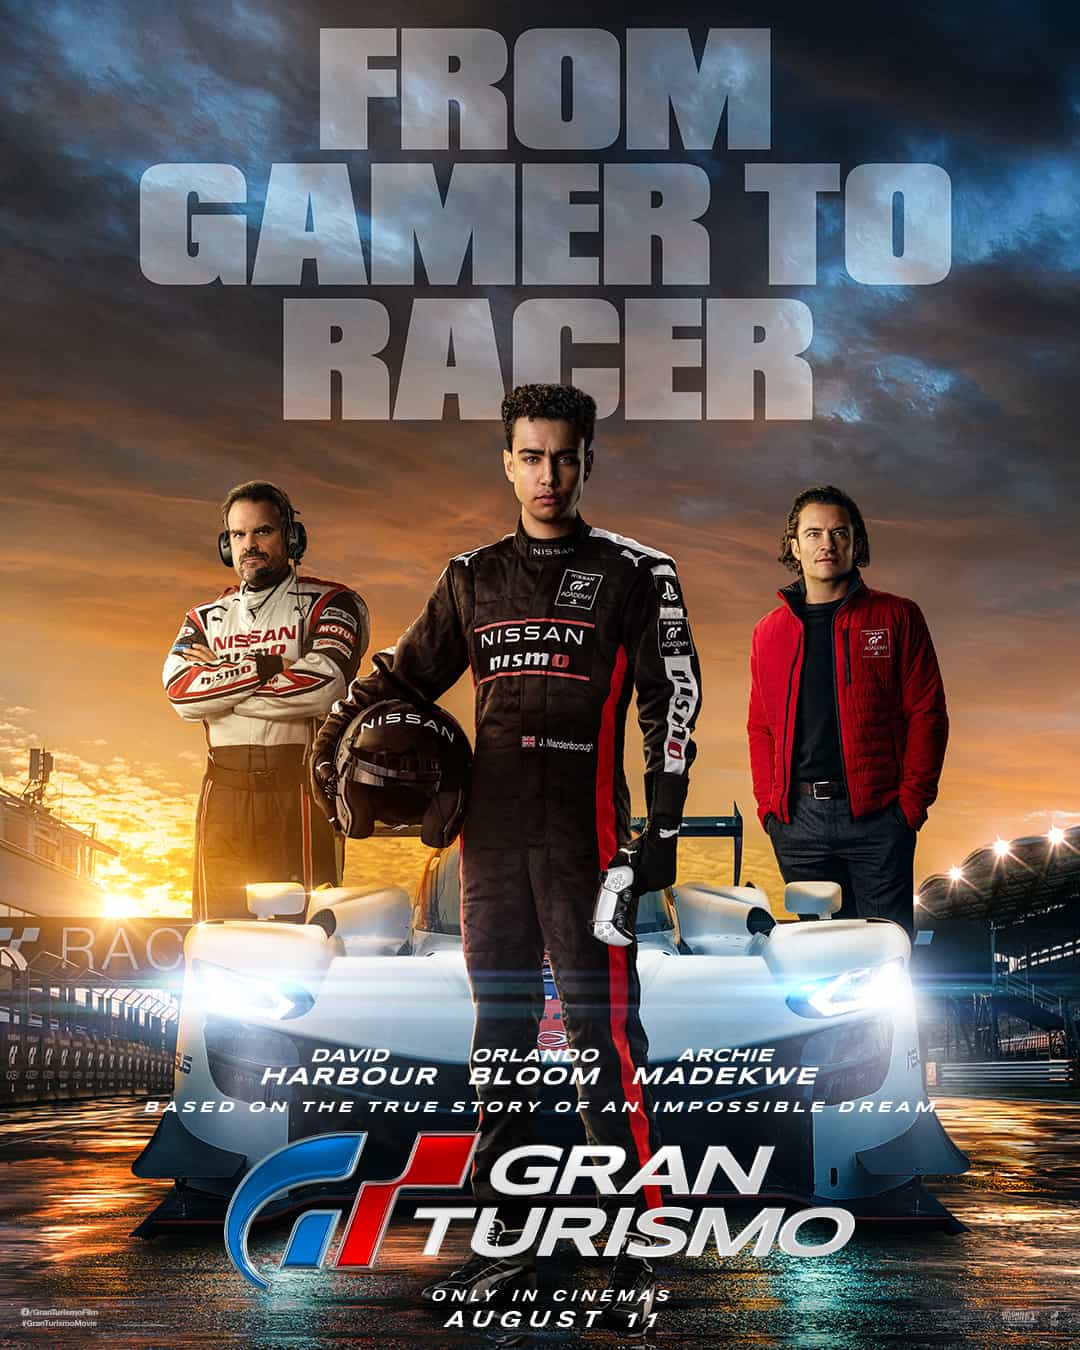 Check out the new trailer and poster for upcoming movie Gran Turismo which stars David Harbour and Orlando Bloom - movie UK release date 11th August 2023 #granturismo